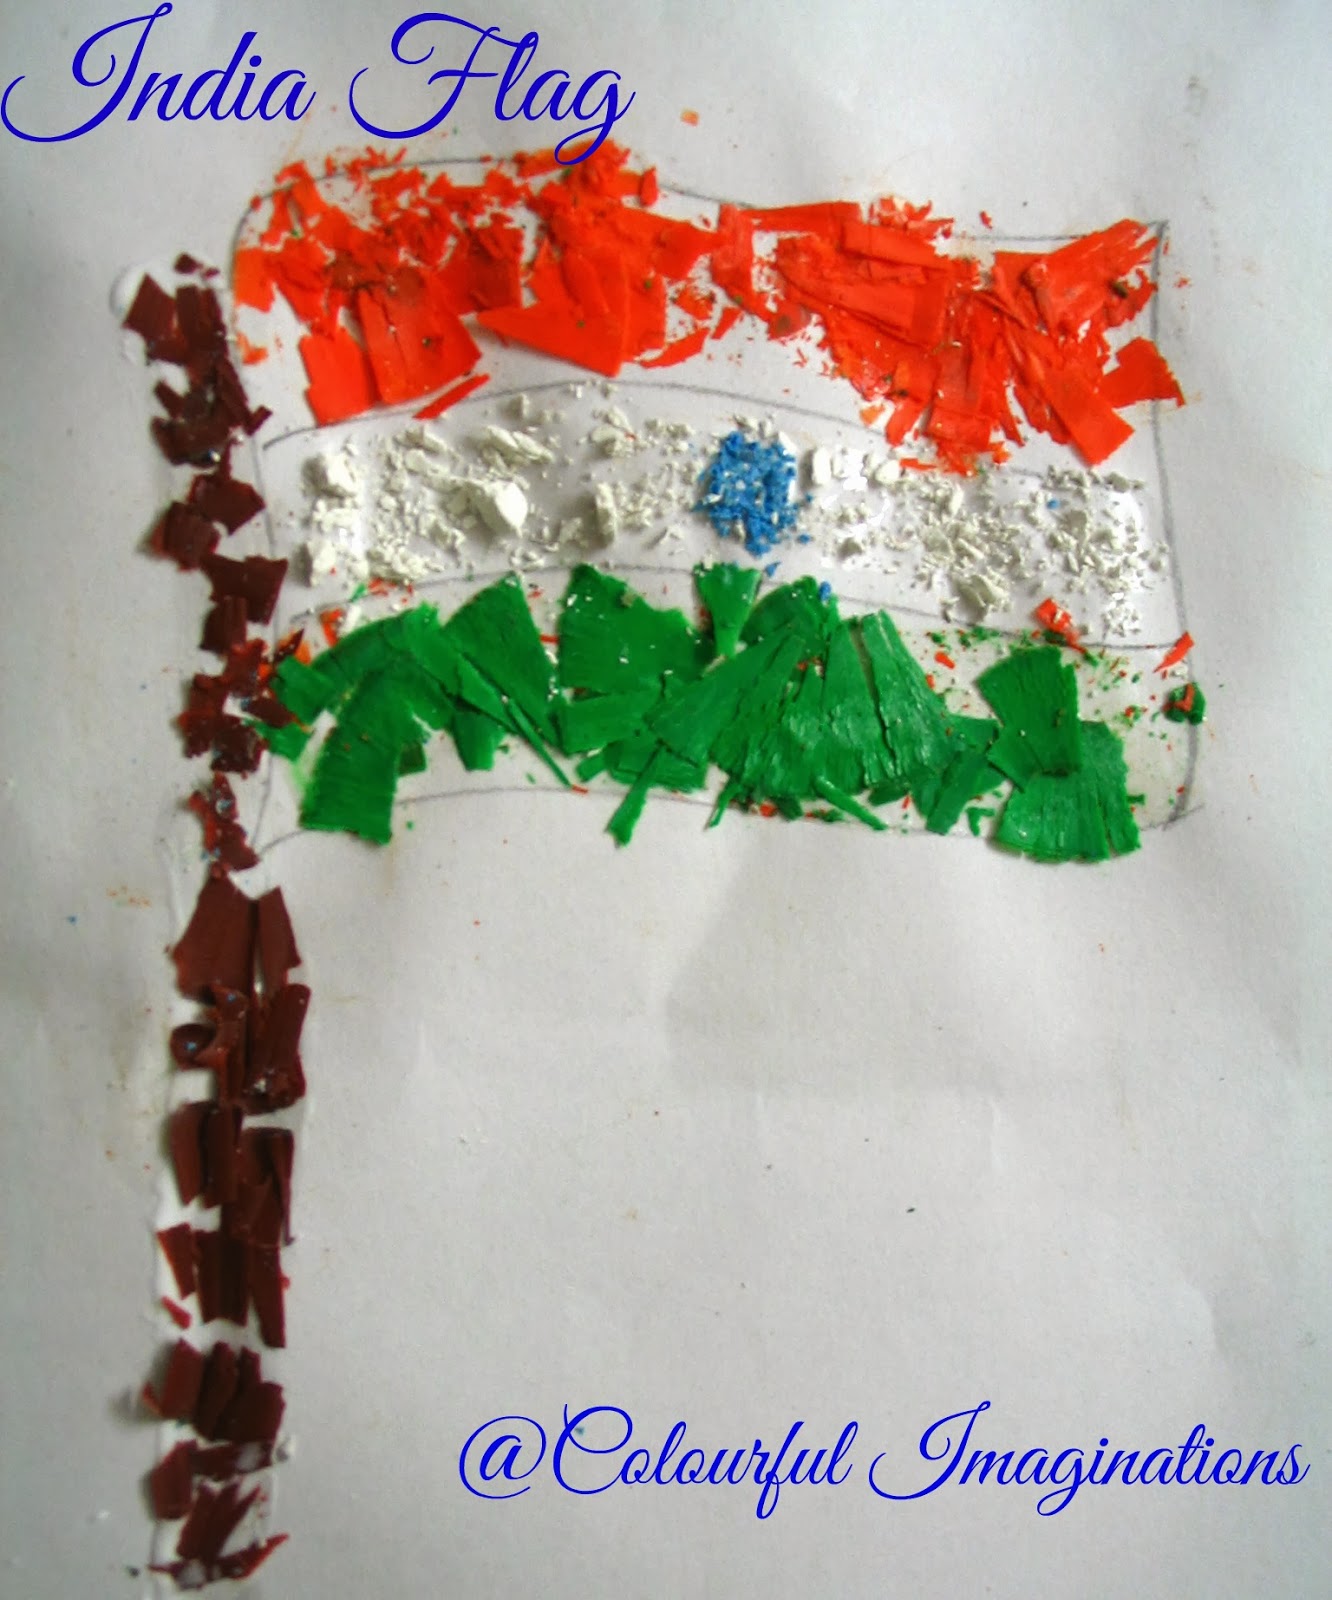 50 Ideas for India Independence Day or Independence Day party - crayon shaving flag